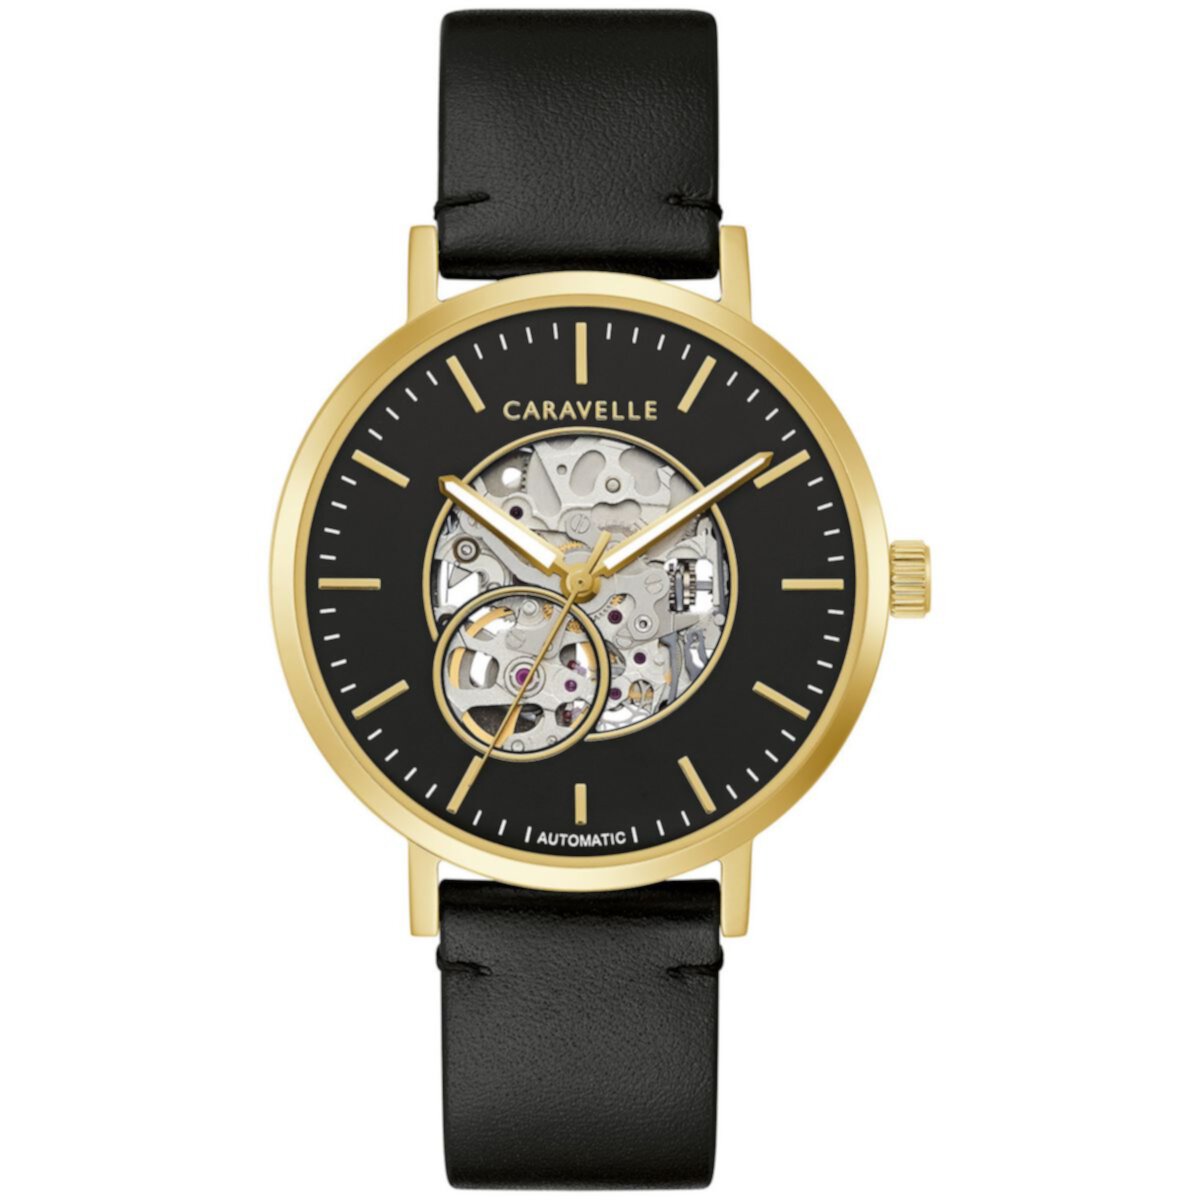 Caravelle by Bulova Men's Gold Tone Stainless Steel Black Leather Strap Watch - 44A121 Caravelle